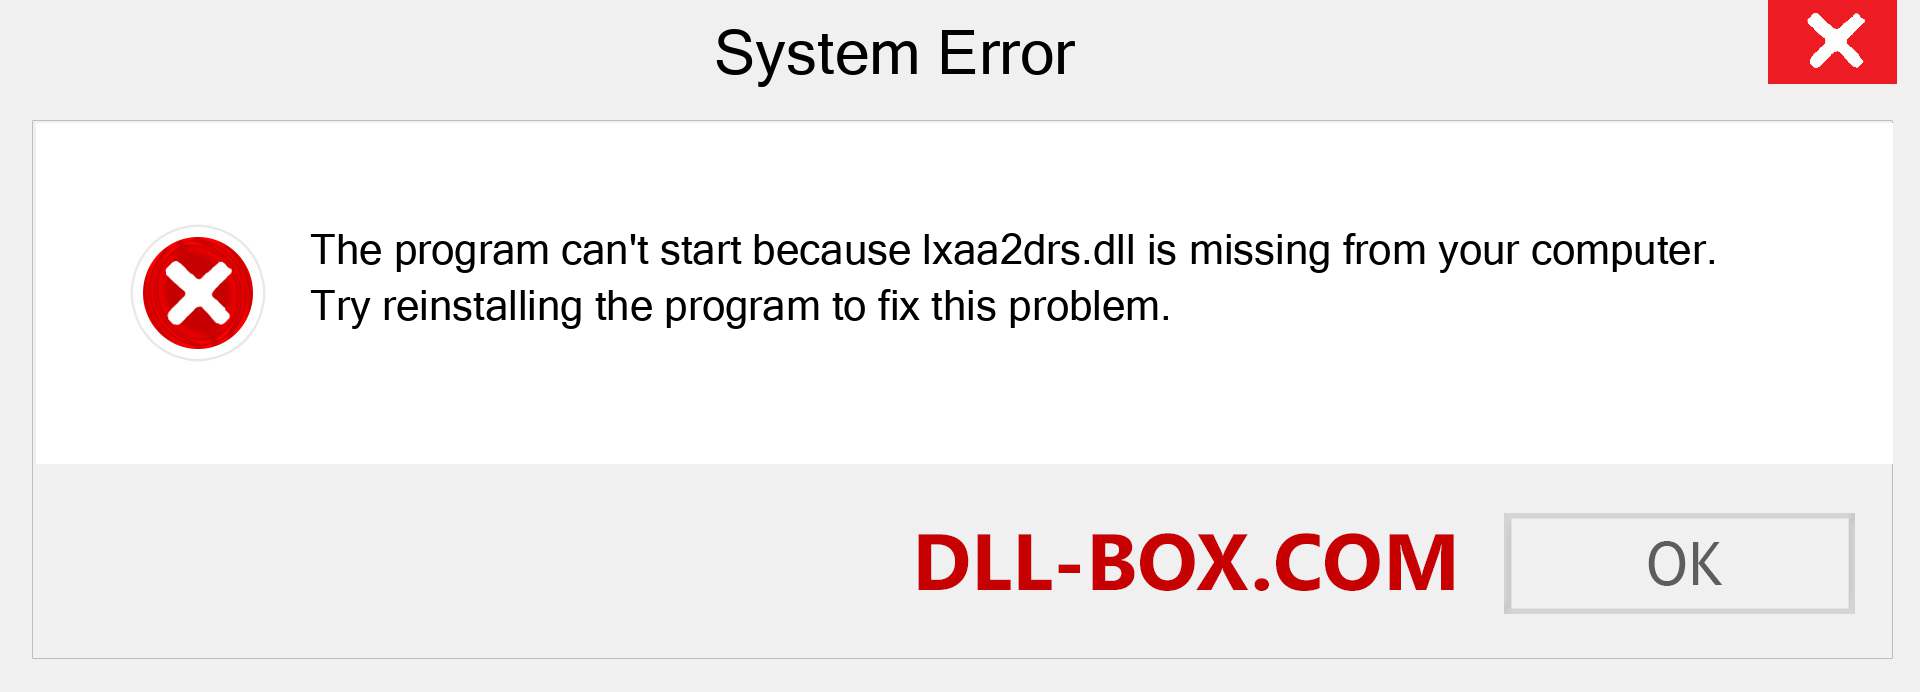  lxaa2drs.dll file is missing?. Download for Windows 7, 8, 10 - Fix  lxaa2drs dll Missing Error on Windows, photos, images